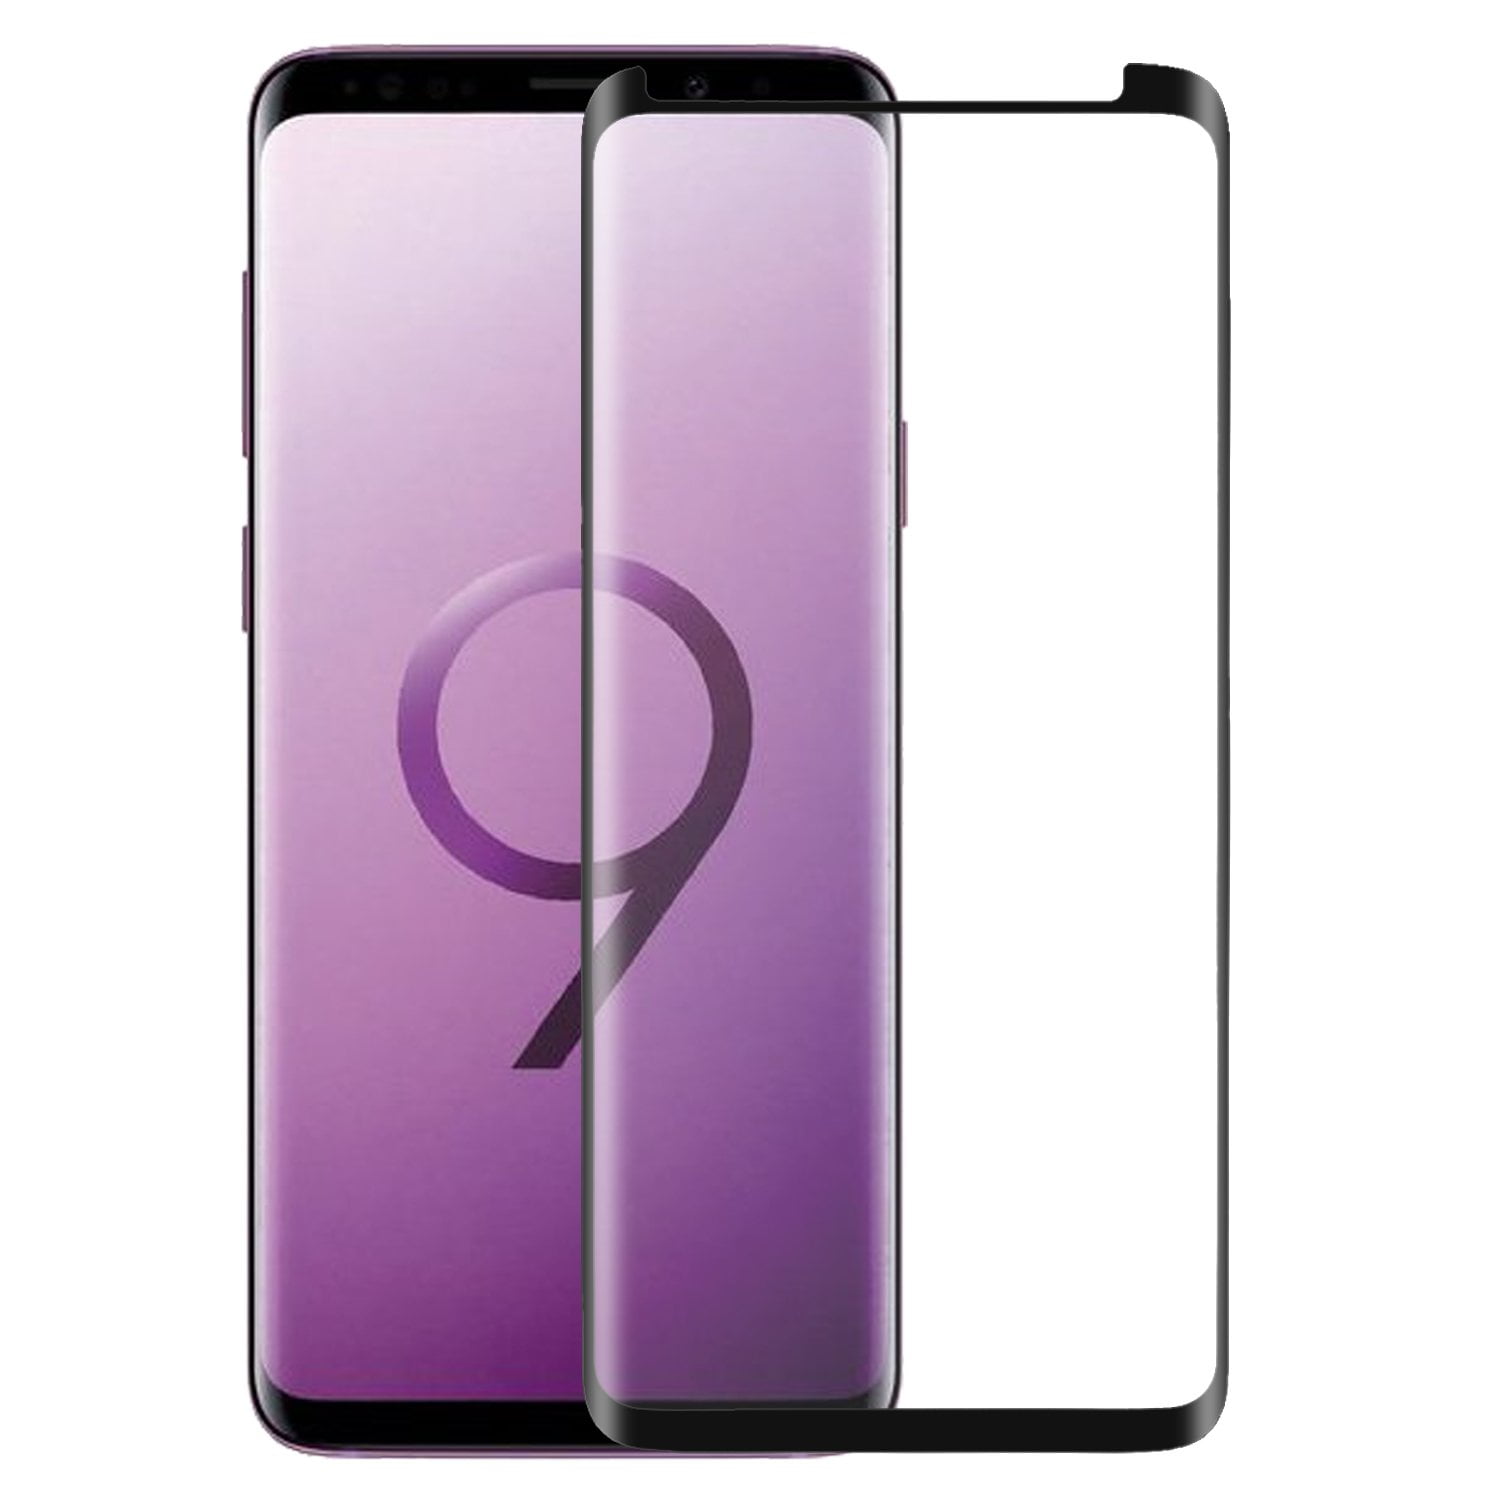 Case Friendly Film Screen Protector for Samsung Galaxy S9 Plus Full Coverage Bubble Free Samsung Galaxy S9 Plus Tempered Glass Screen Protector, Anti-Scratch